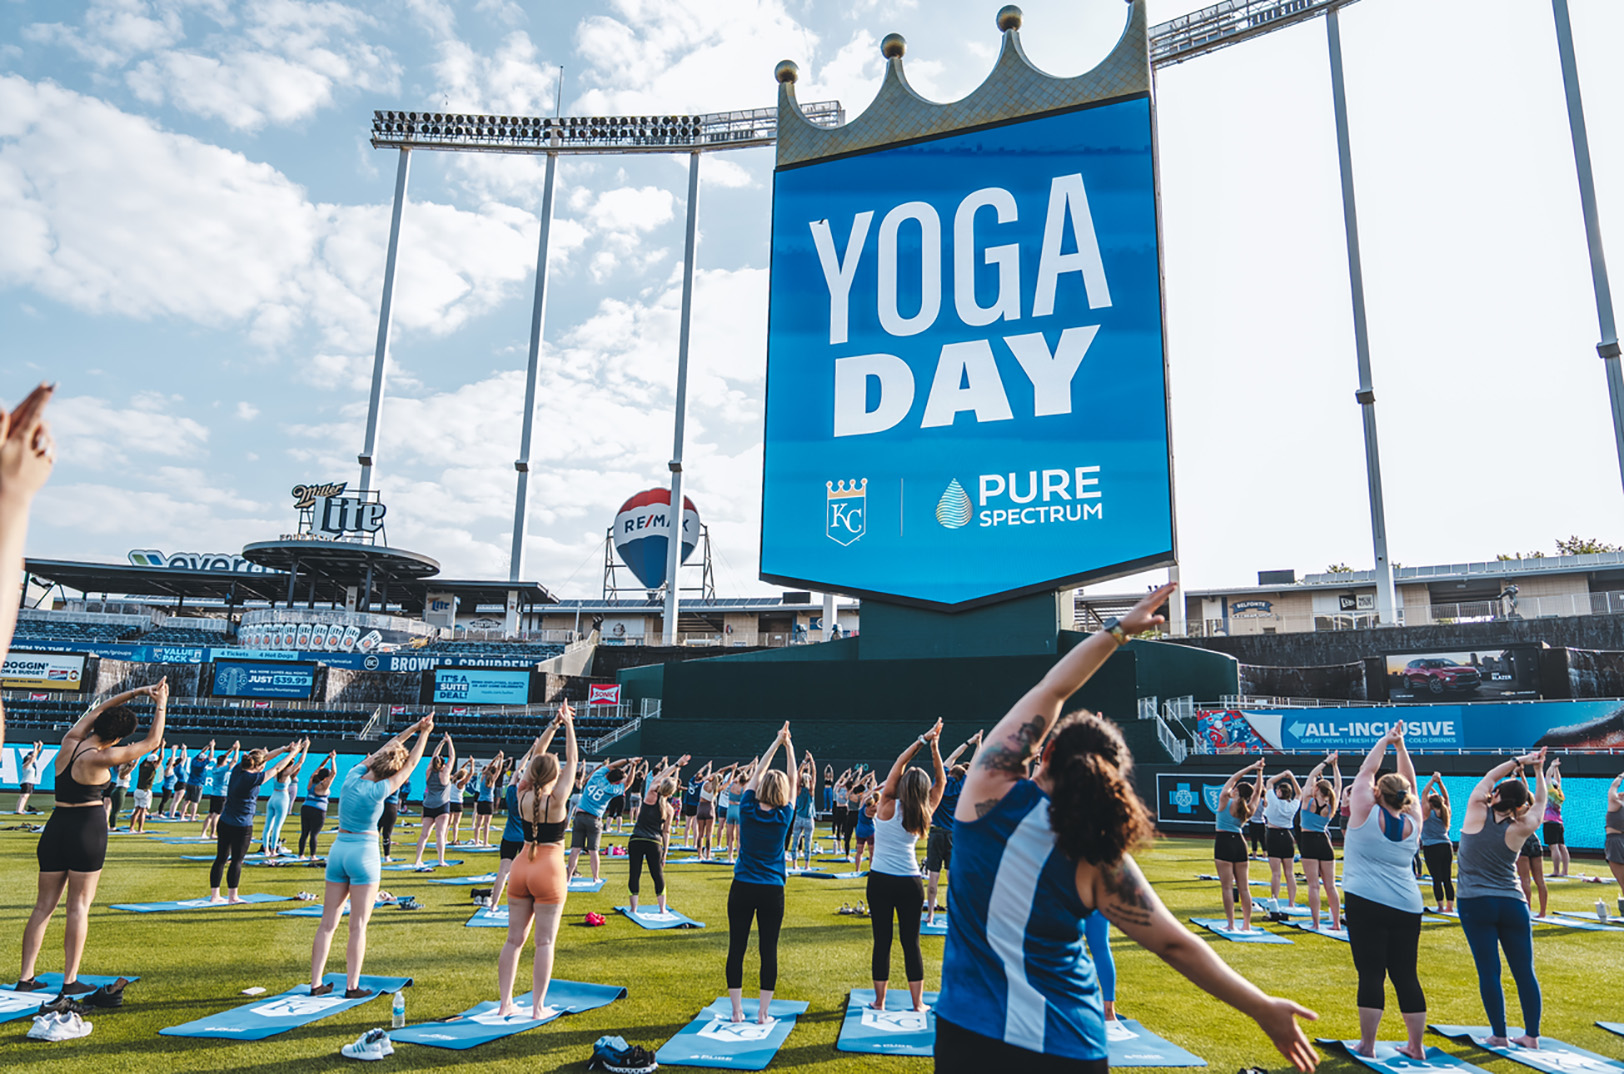 Yoga Day at the K Sponsored by Pure Spectrum